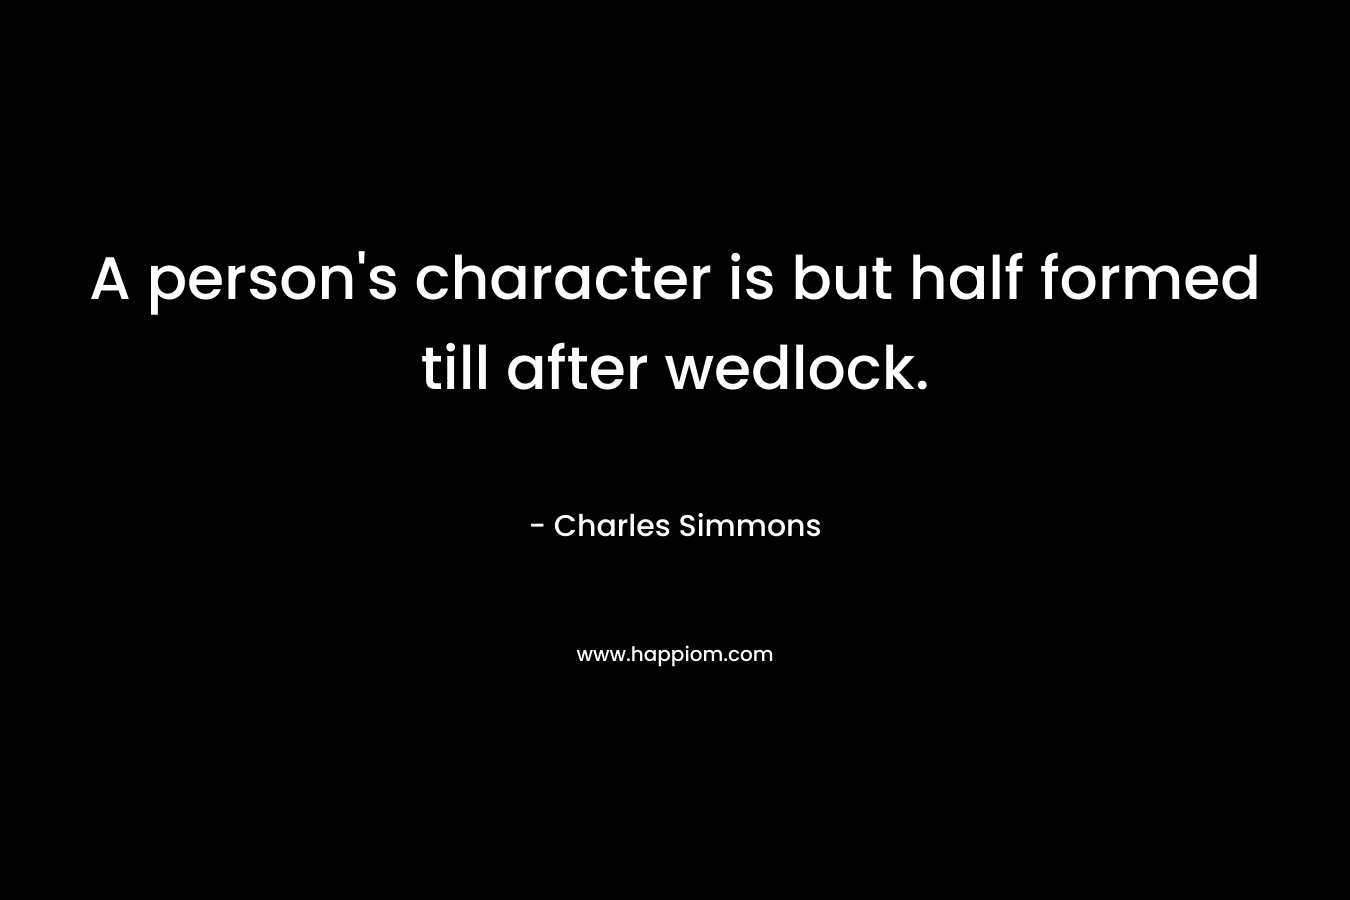 A person’s character is but half formed till after wedlock. – Charles Simmons